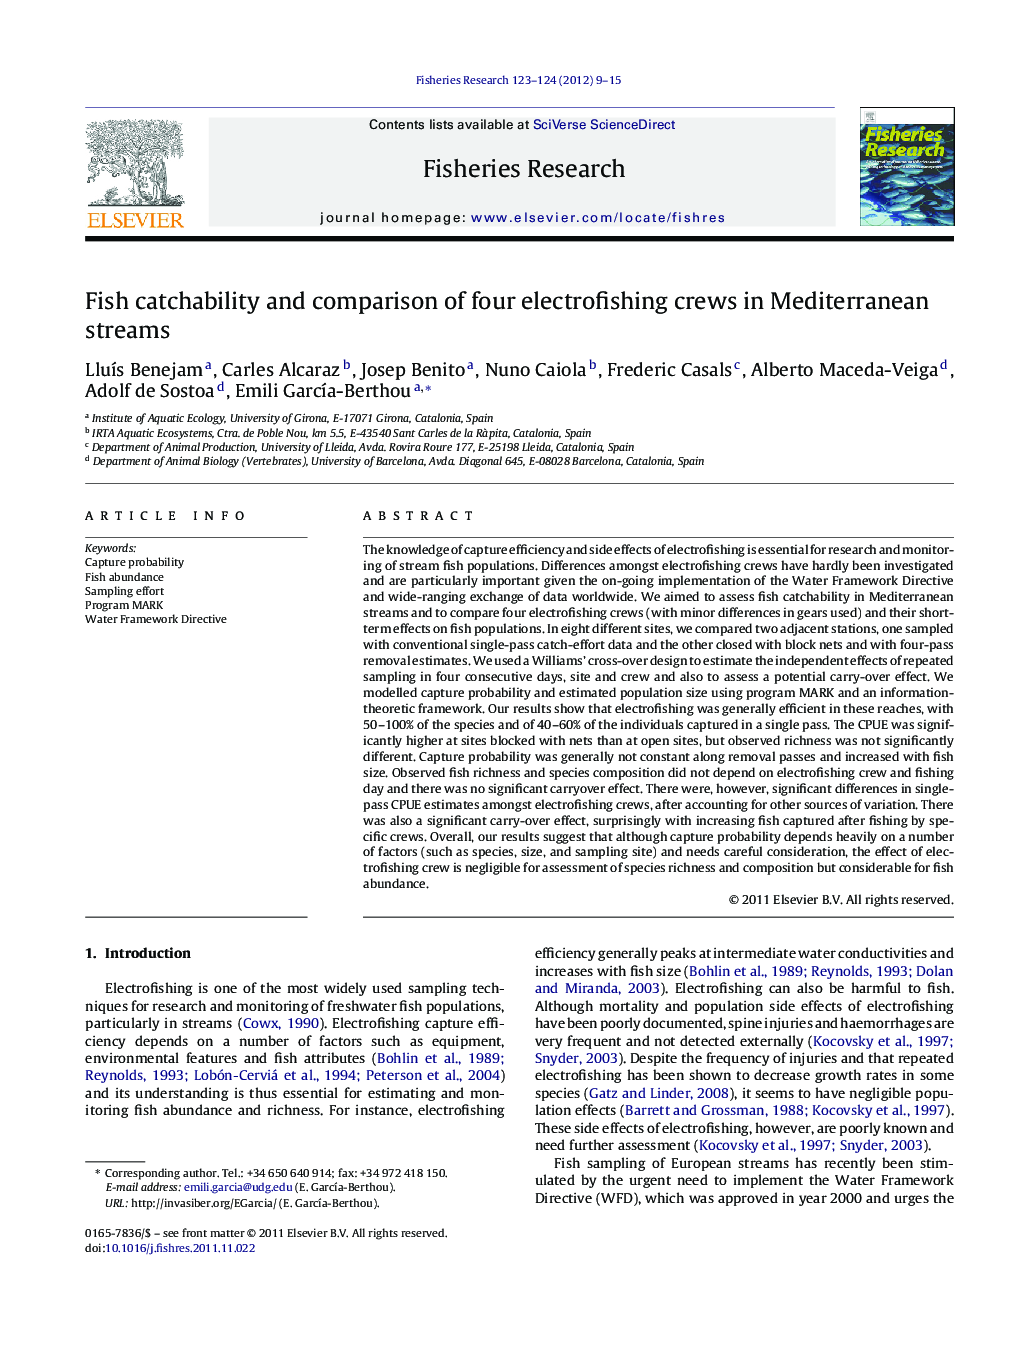 Fish catchability and comparison of four electrofishing crews in Mediterranean streams